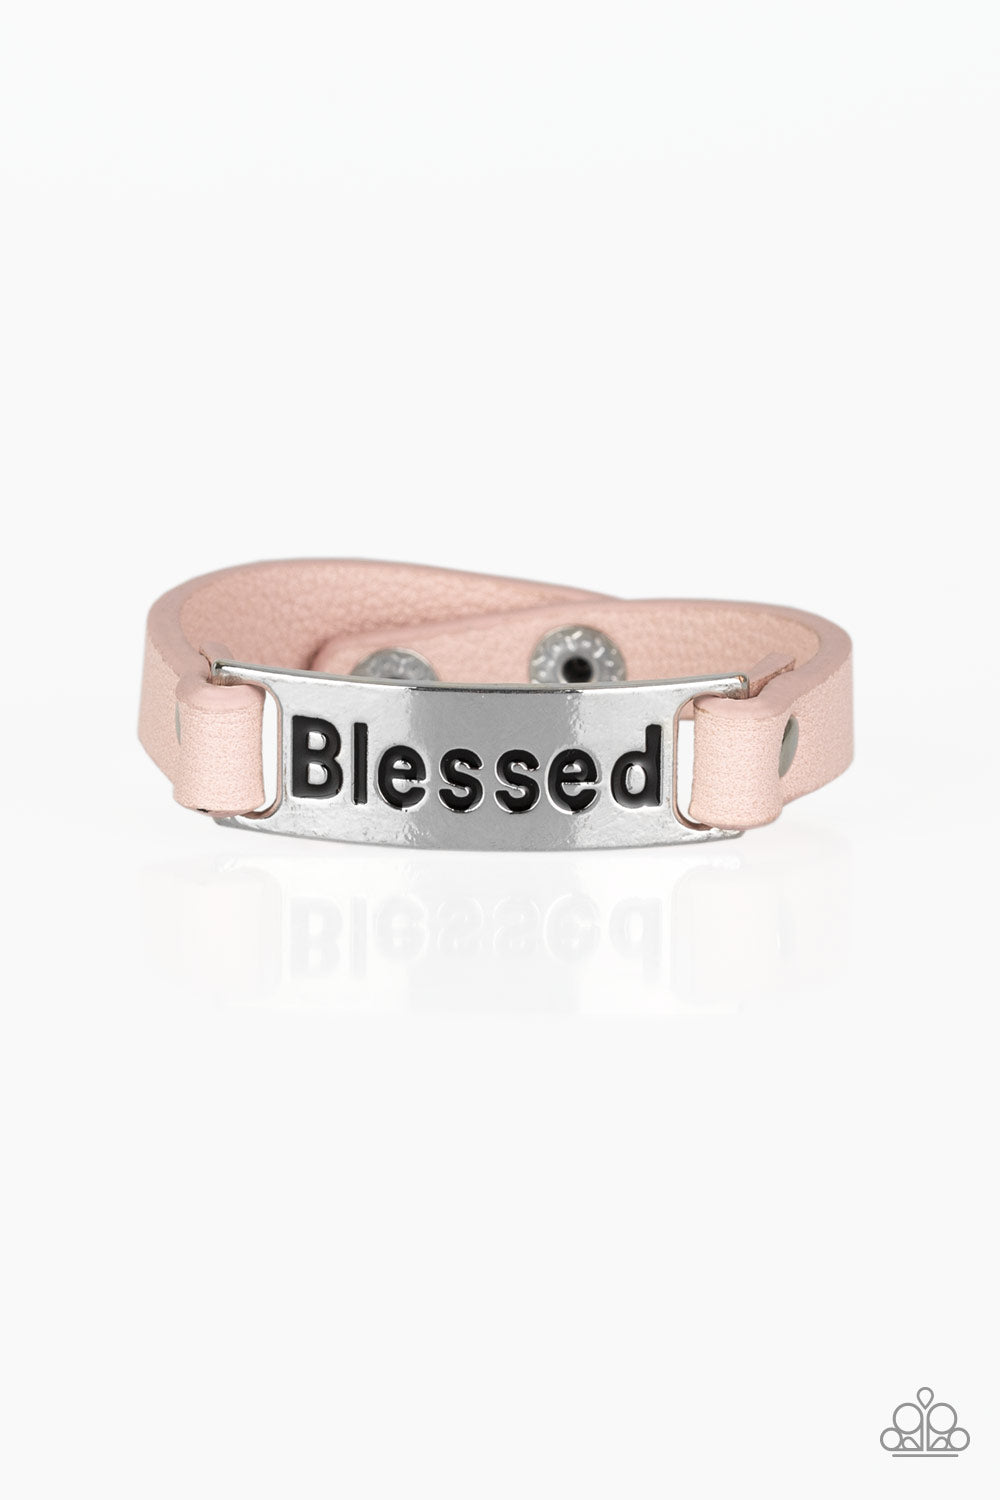 Count Your Blessings Pink Paparazzi Bracelets Cashmere Pink Jewels - Cashmere Pink Jewels & Accessories, Cashmere Pink Jewels & Accessories - Paparazzi